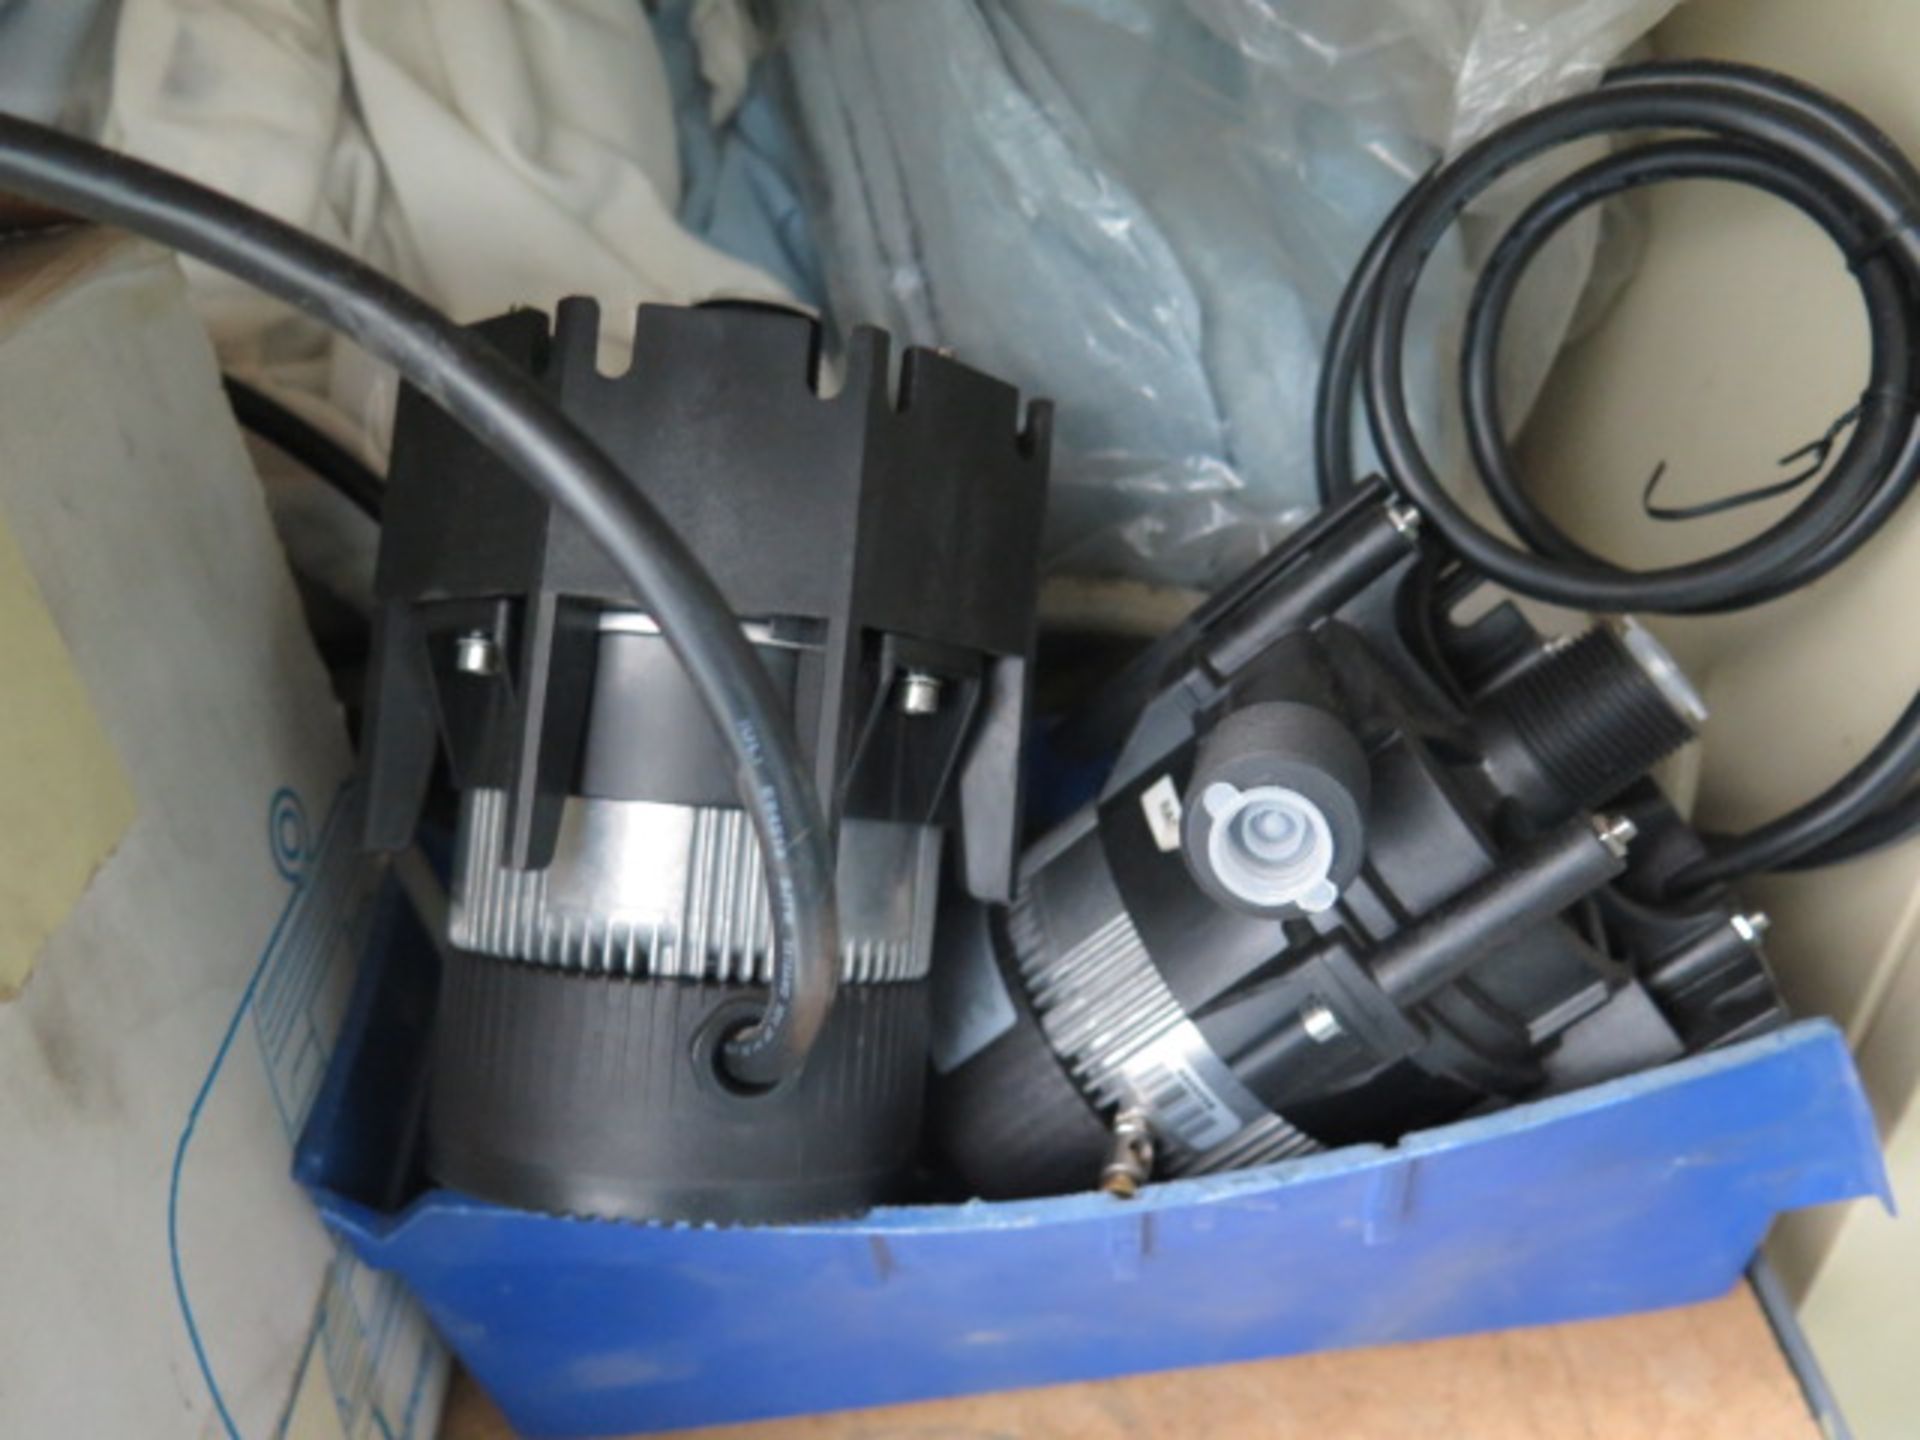 Large Assortment of Omax Motors, Filter Parts and Replacement Parts (SOLD AS-IS - NO WARRANTY) - Image 9 of 13